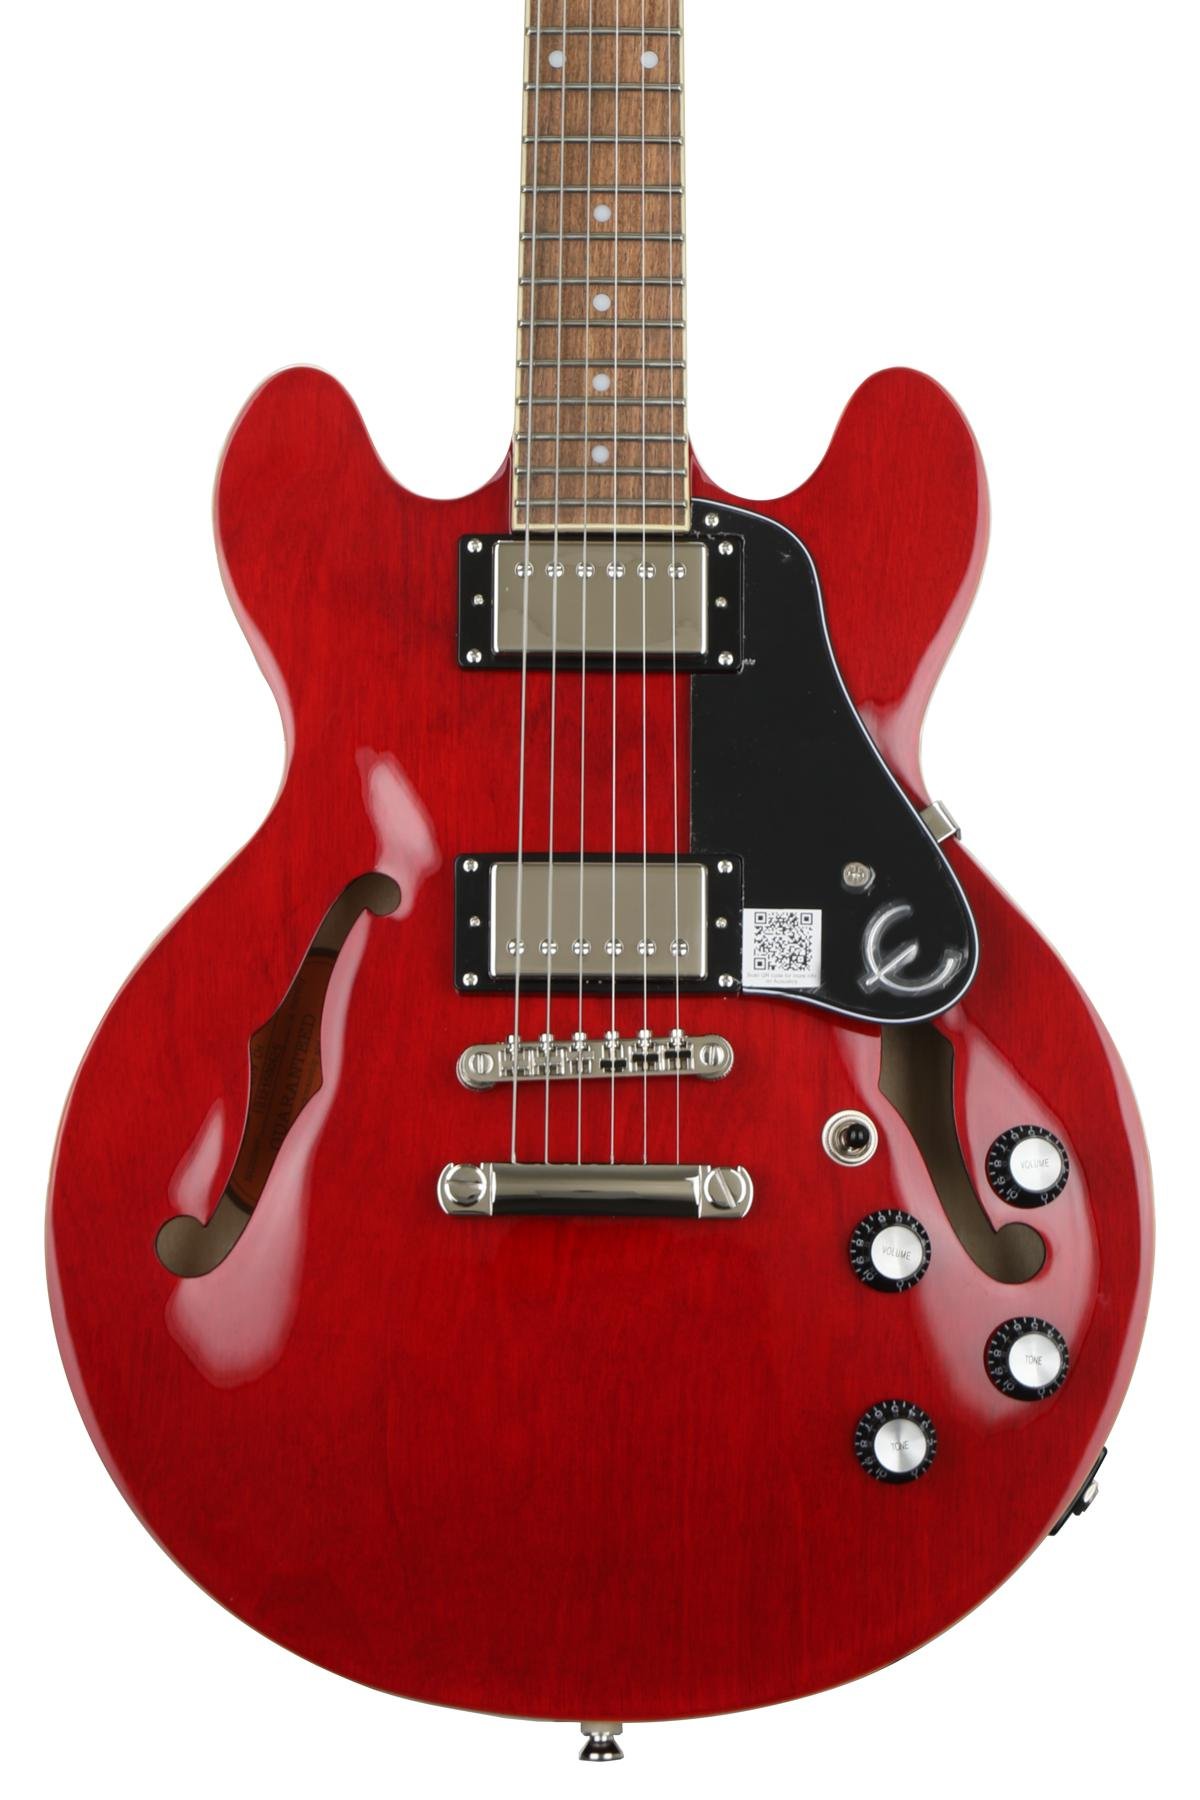 Epiphone ES-339 PRO Semi-Hollow Electric Guitar - Cherry | Sweetwater